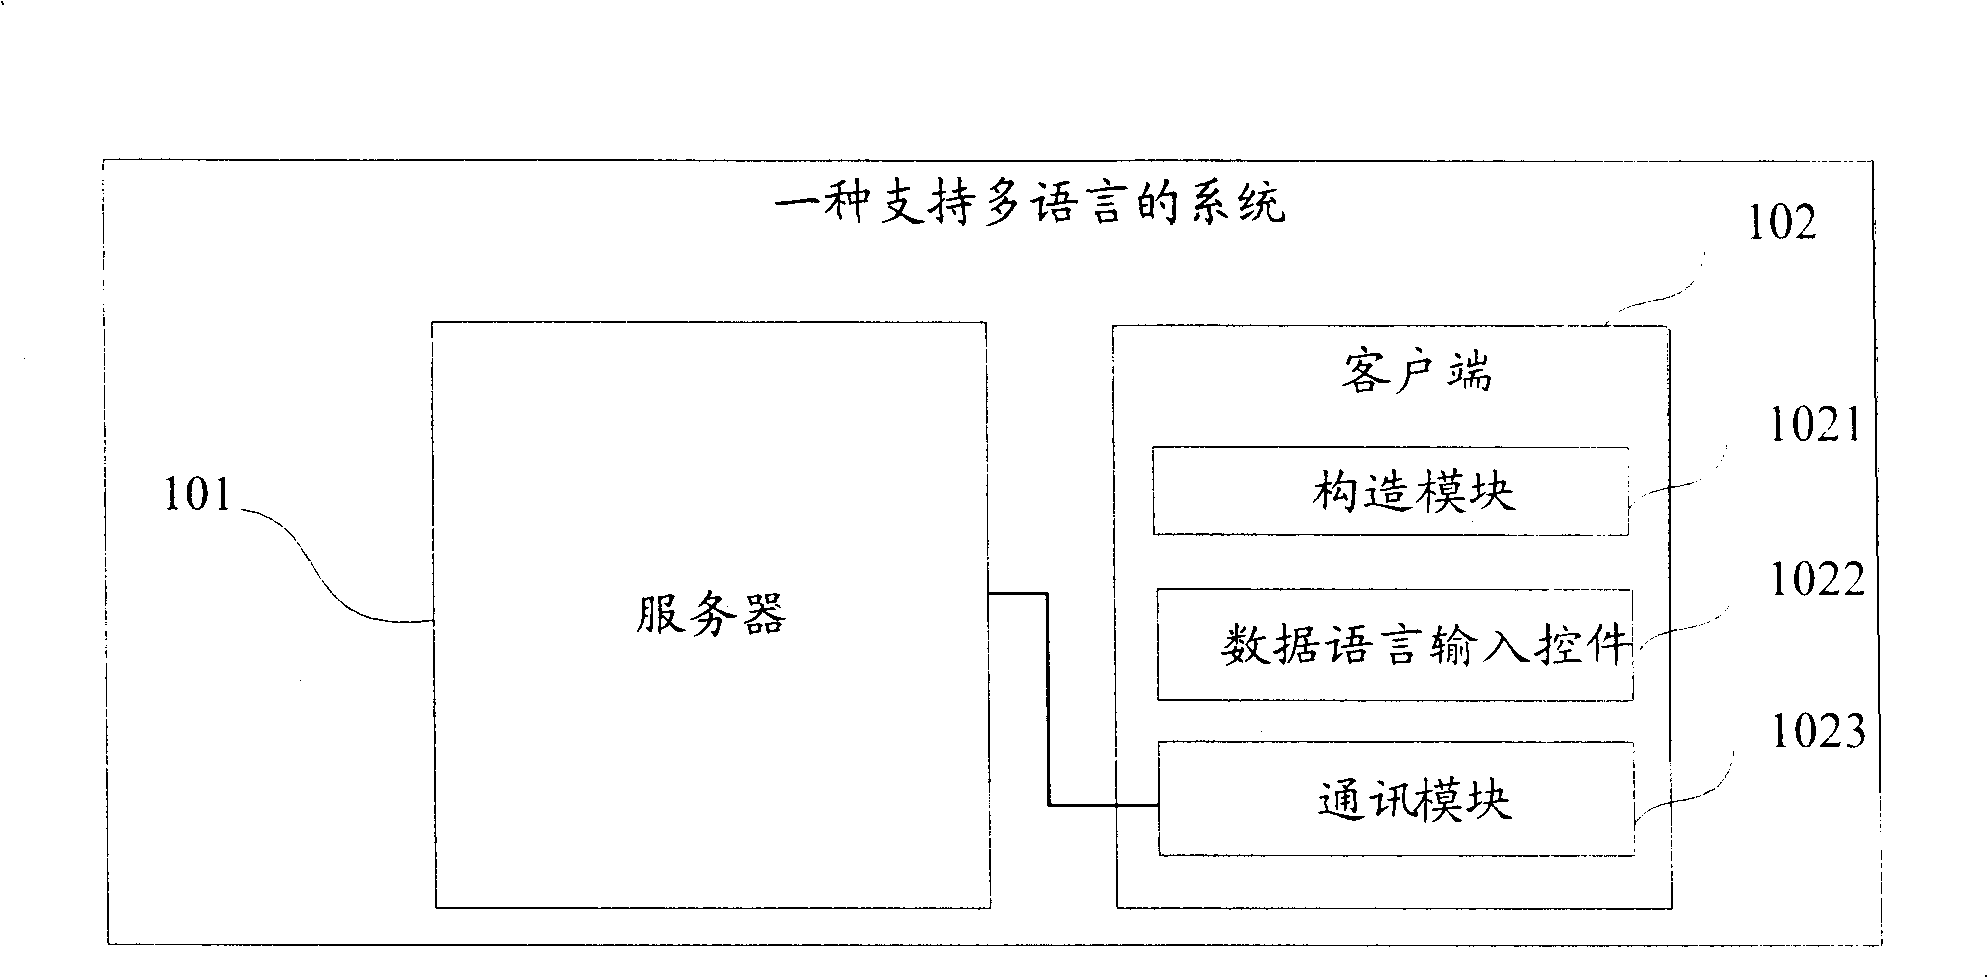 System for supporting multi-language and method for inputting and reading multi-language data